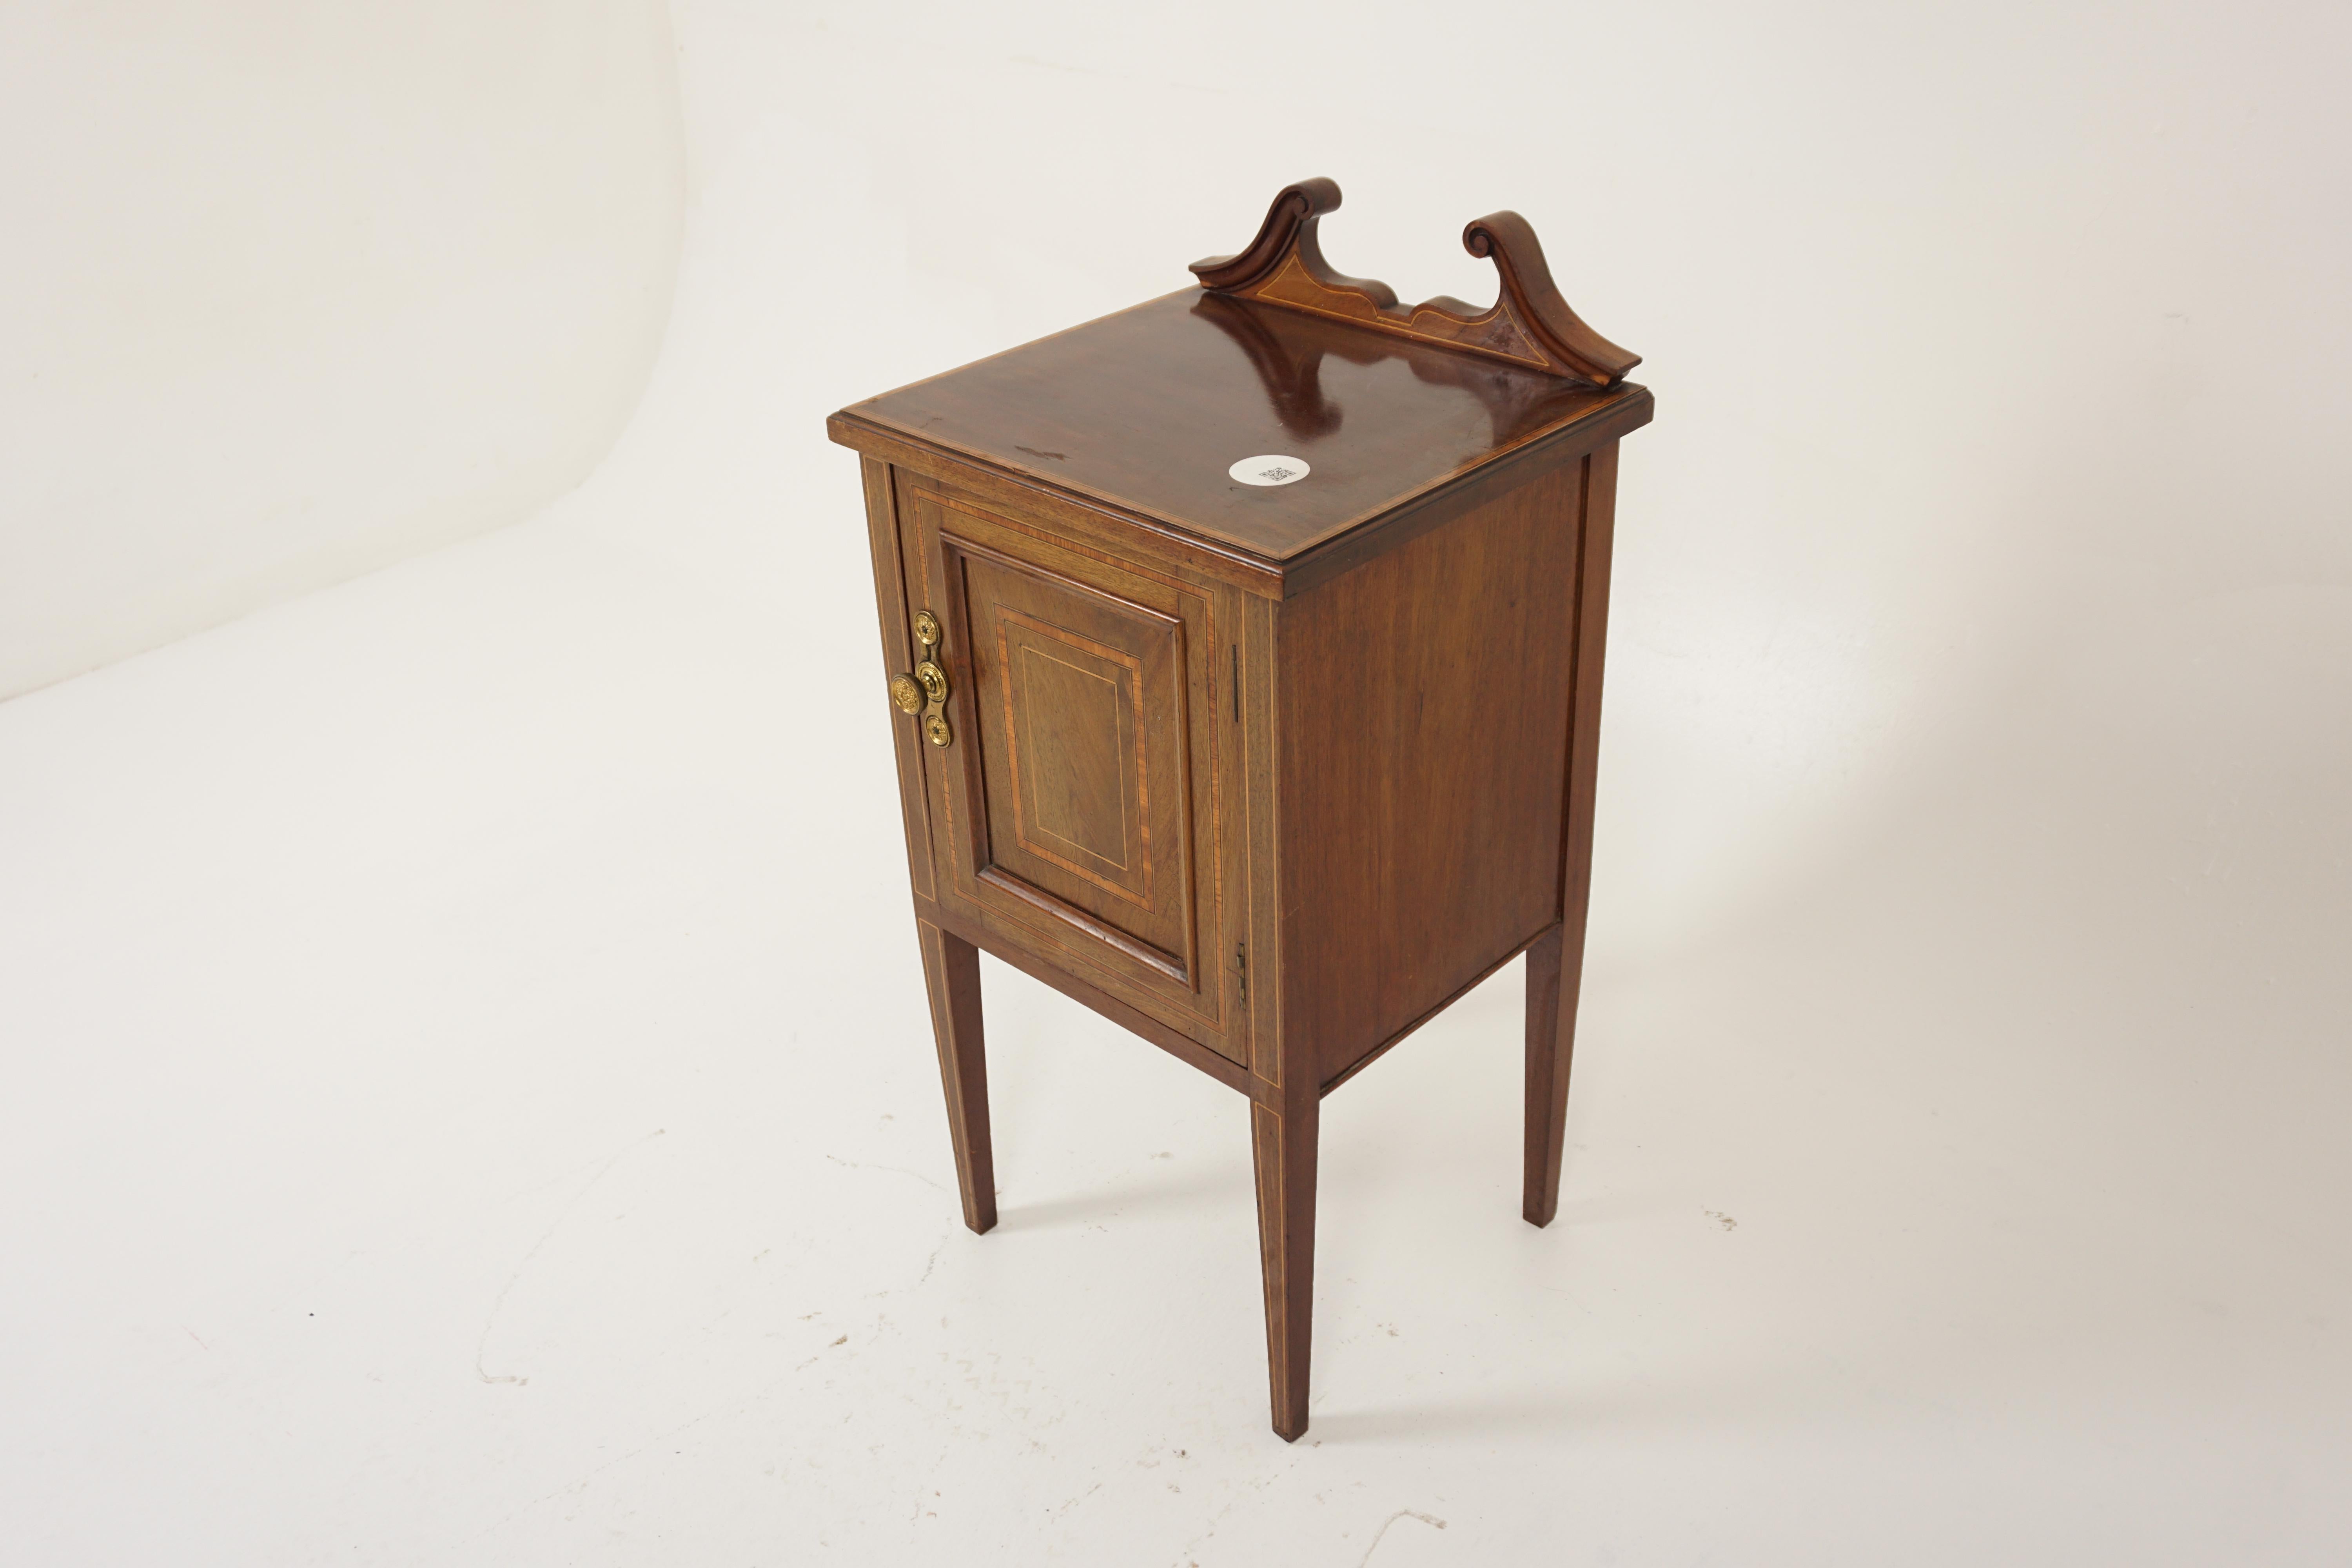 Antique Walnut Nightstand, Sheraton Revival Quality Inlaid Walnut Bedside Table, Antique Furniture, Scotland 1900, H1084

+ Scotland 1900
+ Solid Walnut and Veneer (satinwood and boxwood)
+ Original Finish
+ Rectangular inlaid top with inlaid